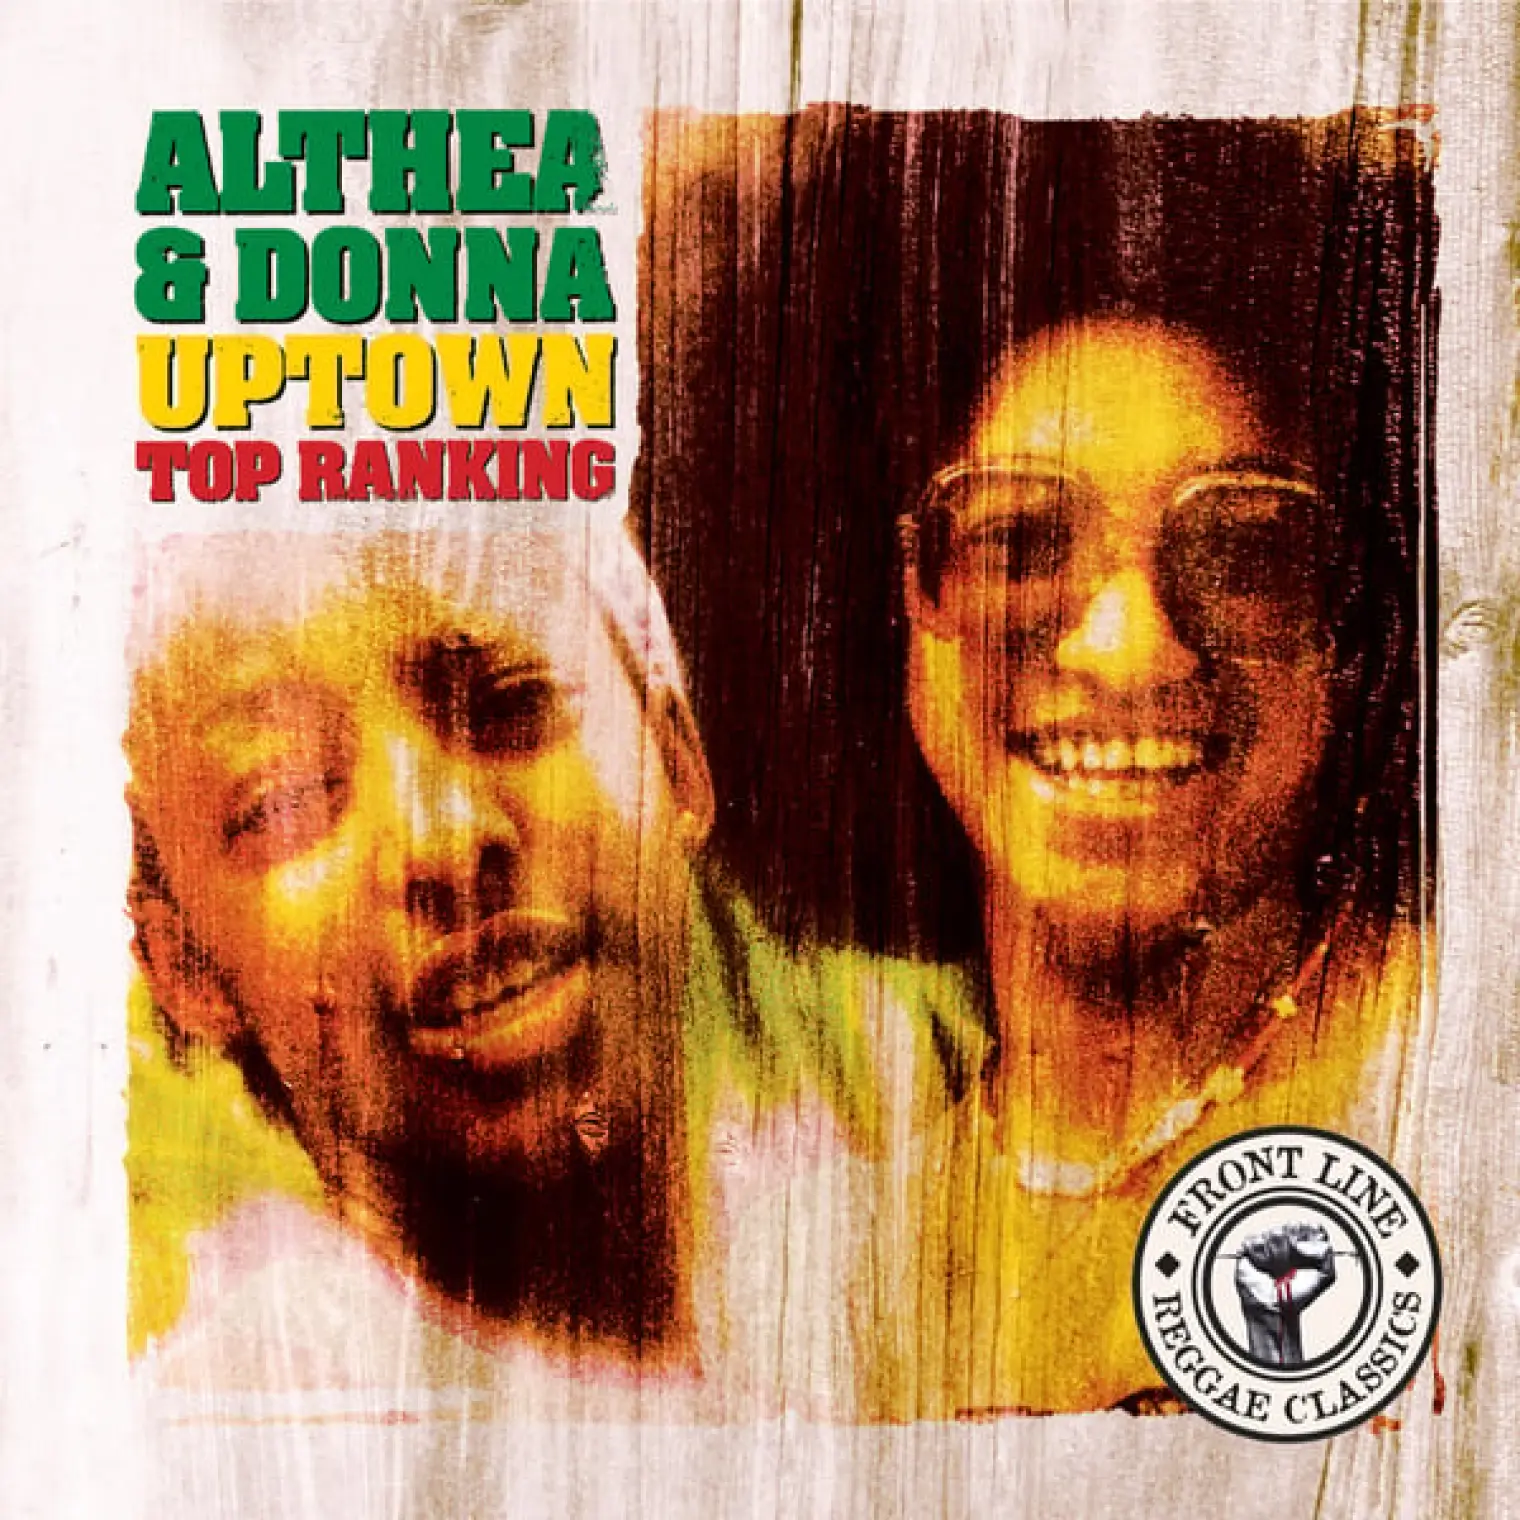 Uptown Top Ranking -  Althea & Donna 